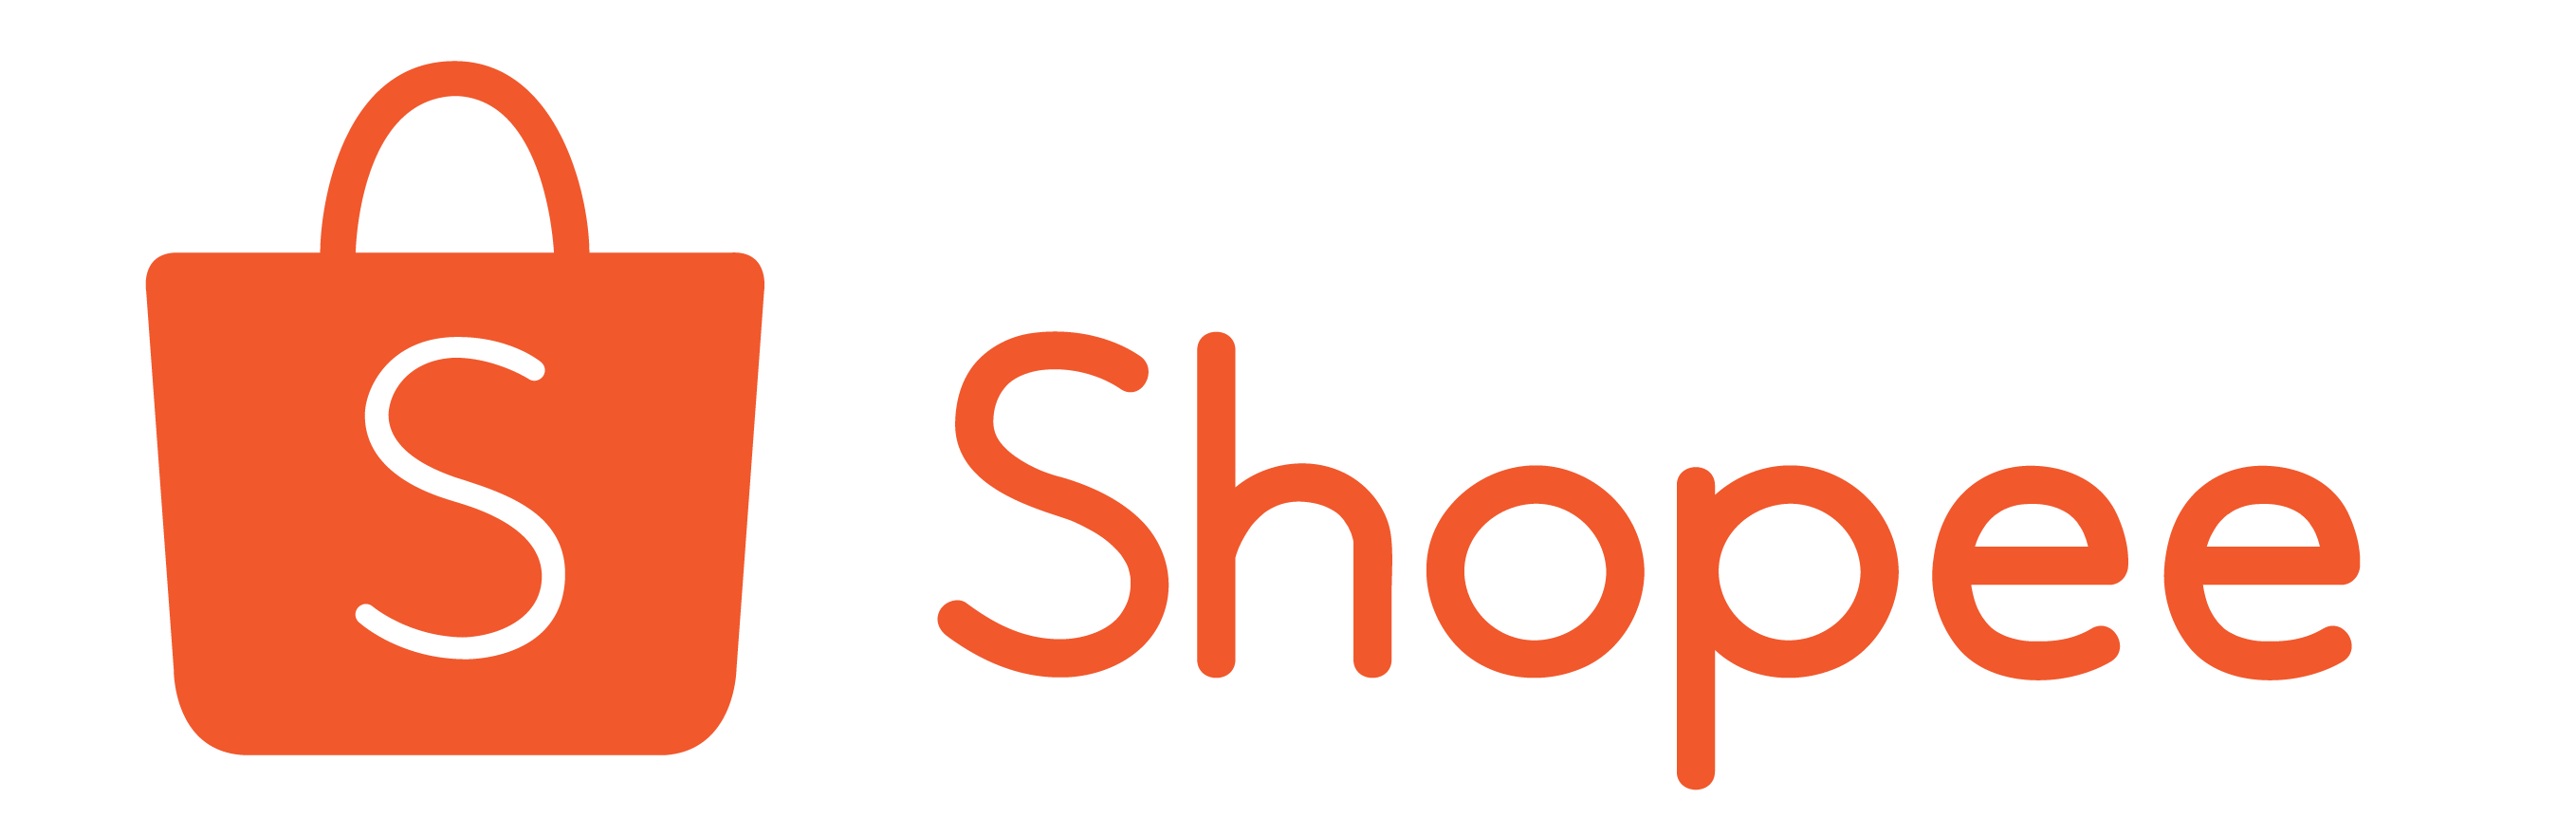 logo shopee png images download shopee 1